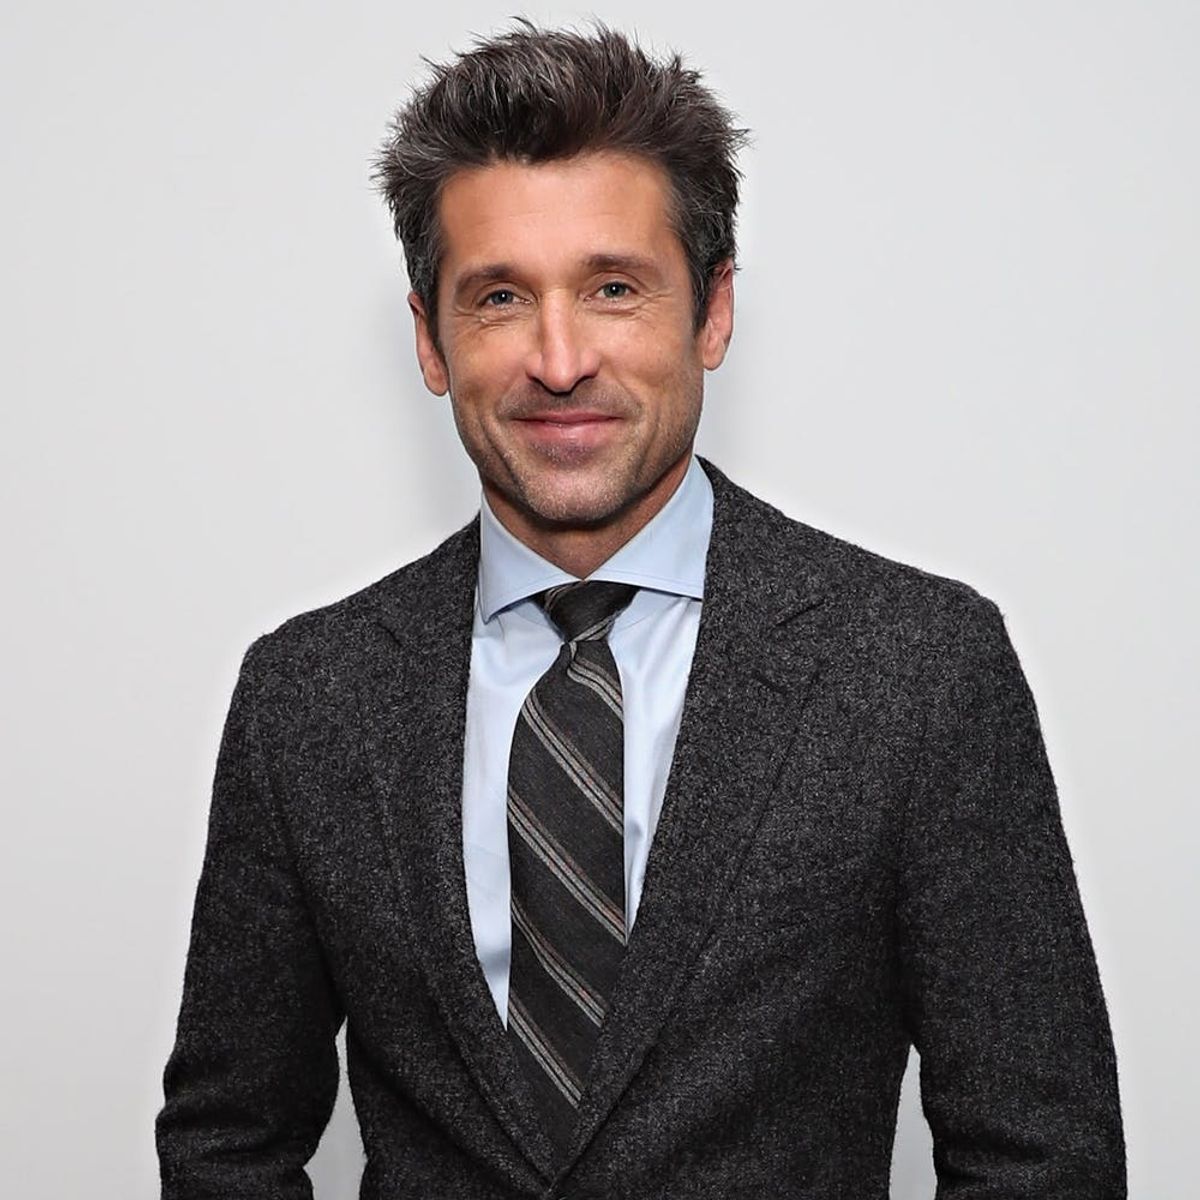 McDreamy Fans, Rejoice! Patrick Dempsey Is Returning to TV in a New Role